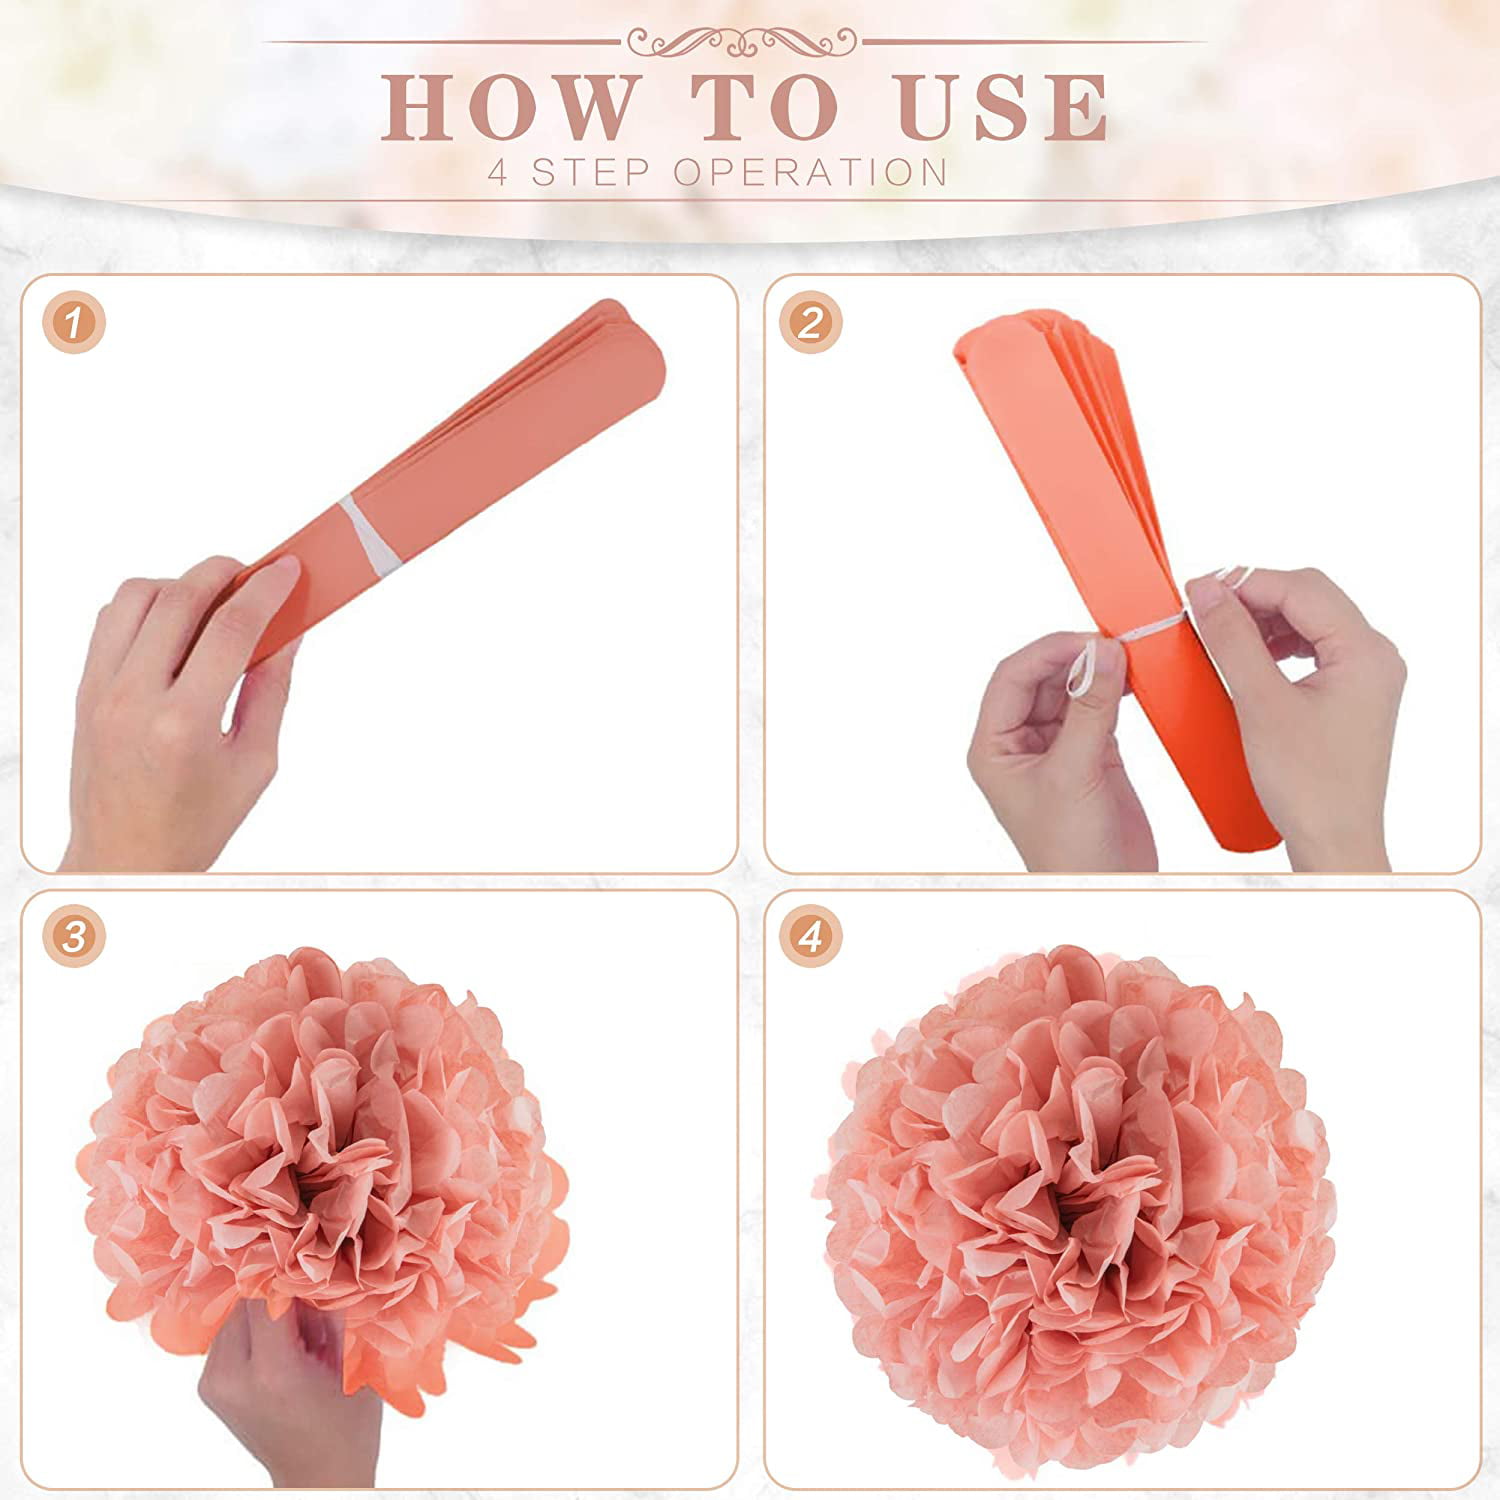 How to assemble your tissue pom pom balls - How Divine  Tissue paper  flowers, Paper flowers diy, Paper flowers